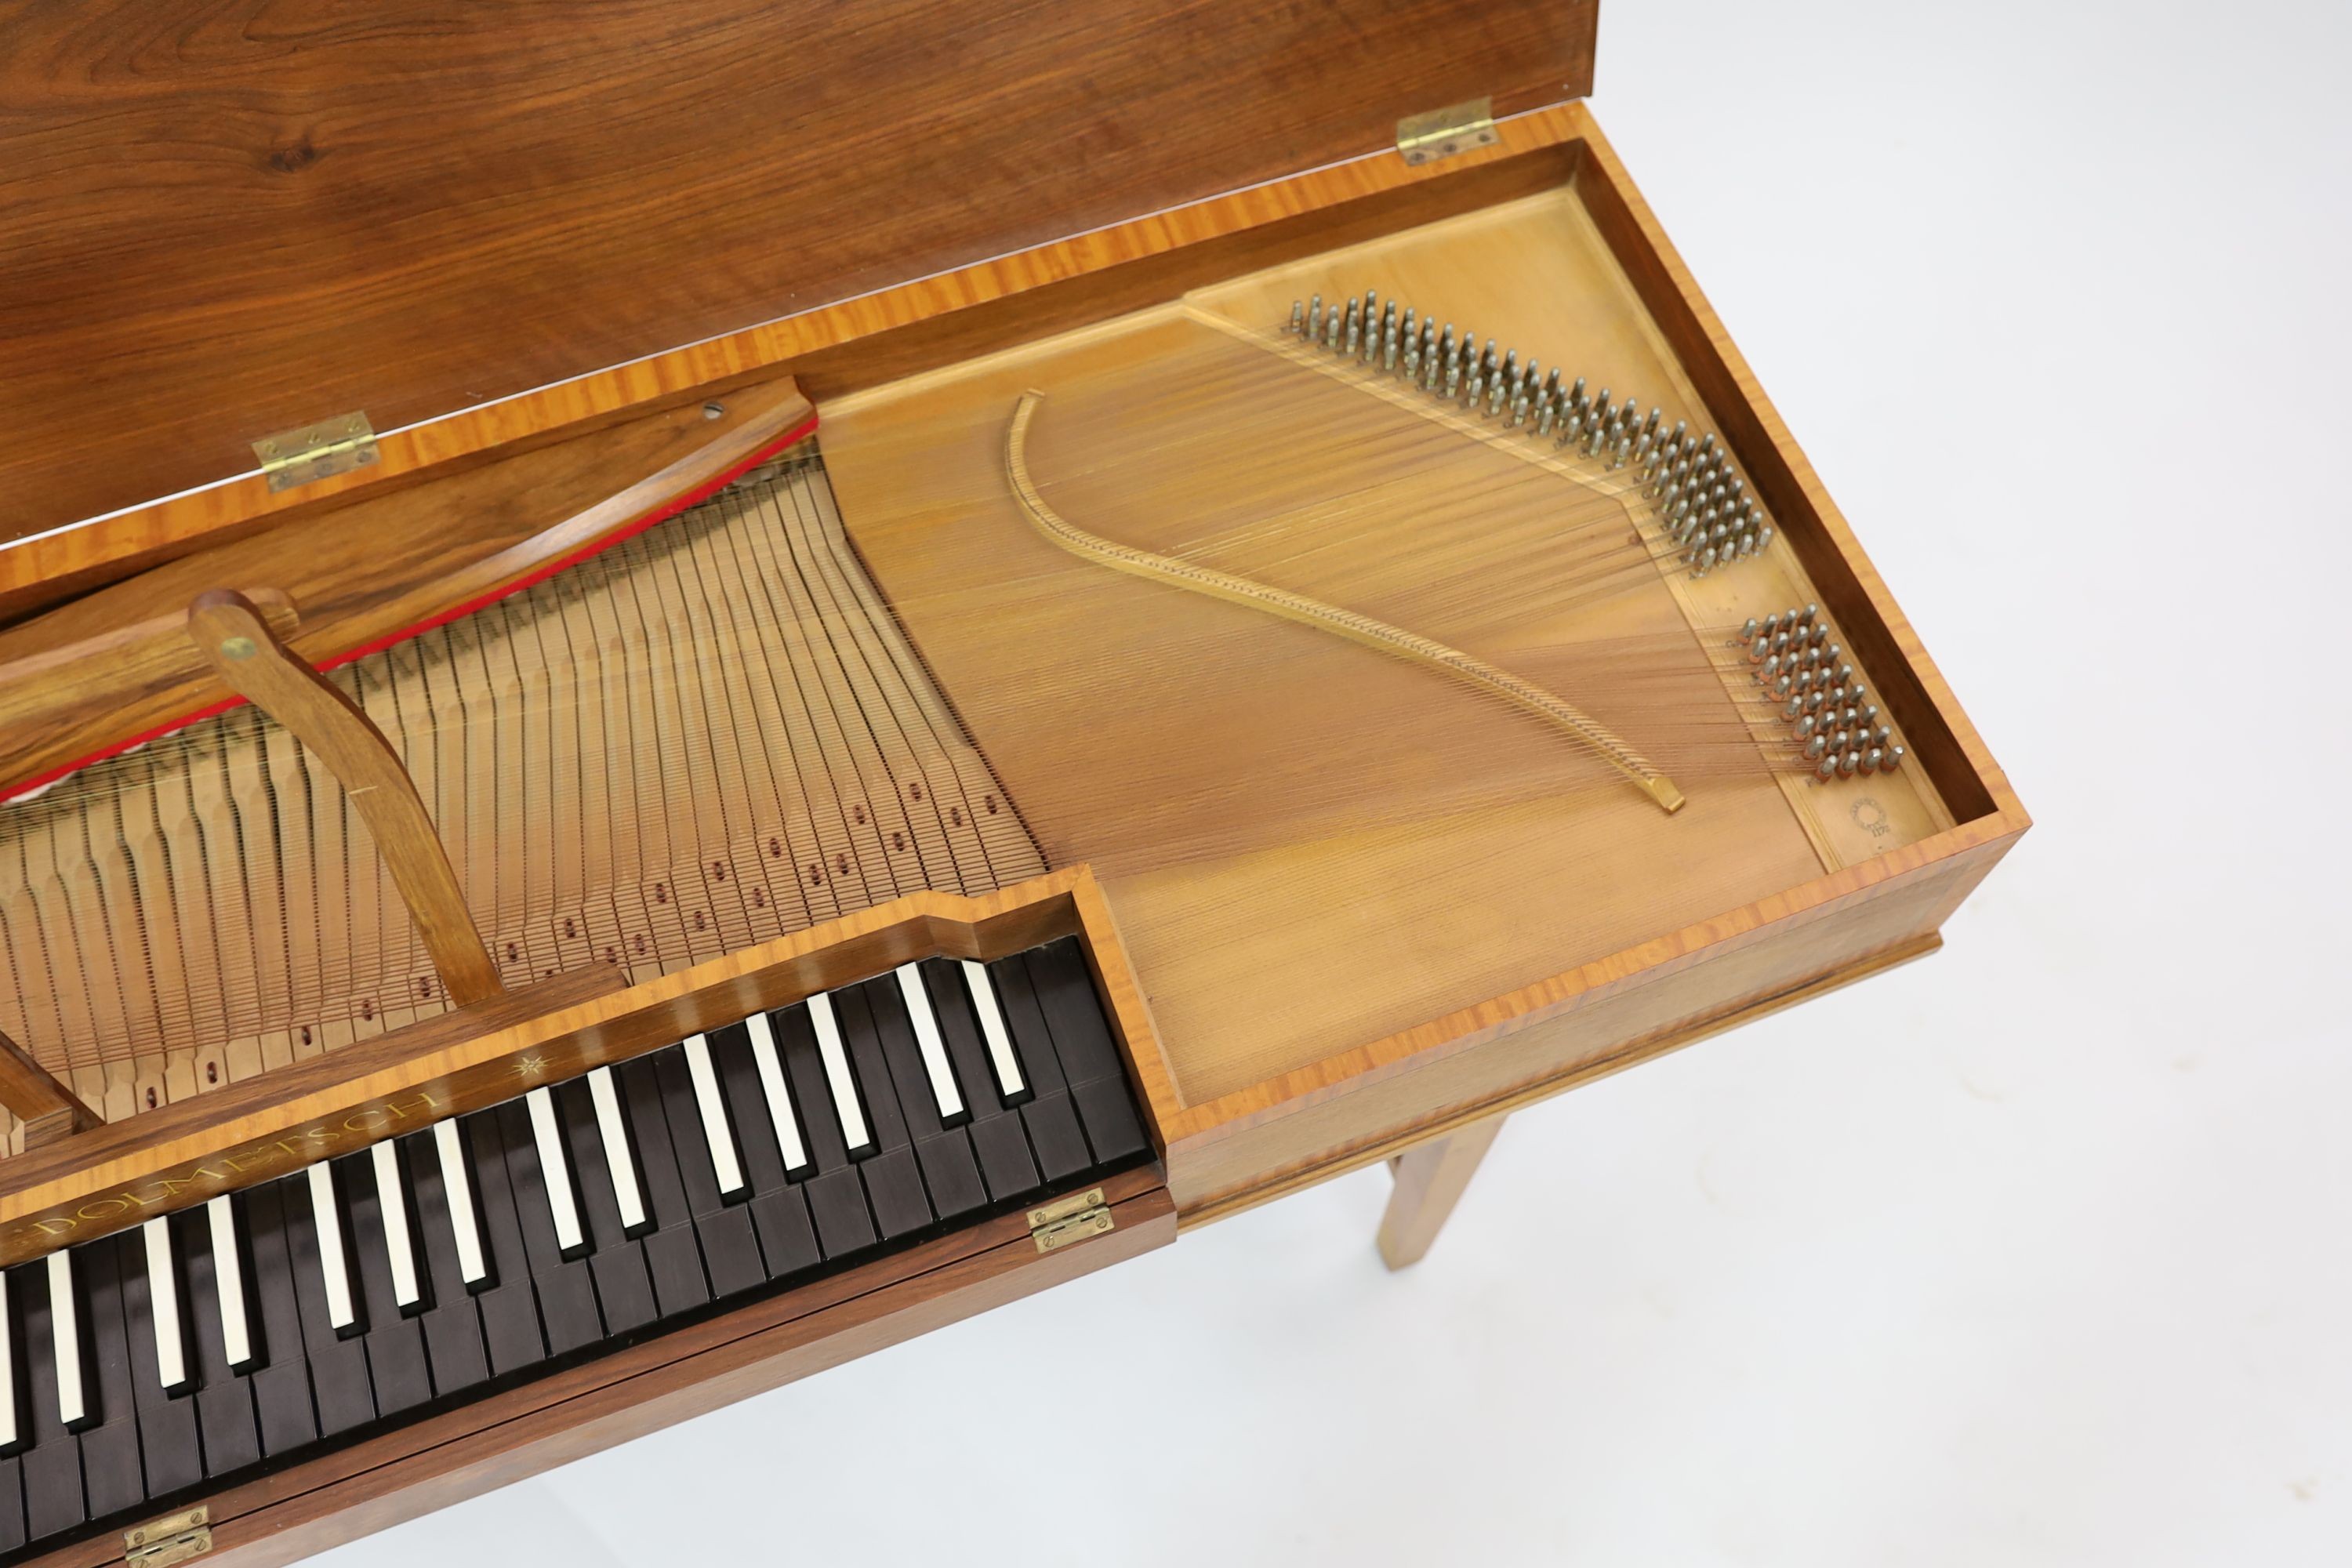 An Arnold Dolmetsch of Haslemere clavichord, width 128cm depth 44cm height 76cm